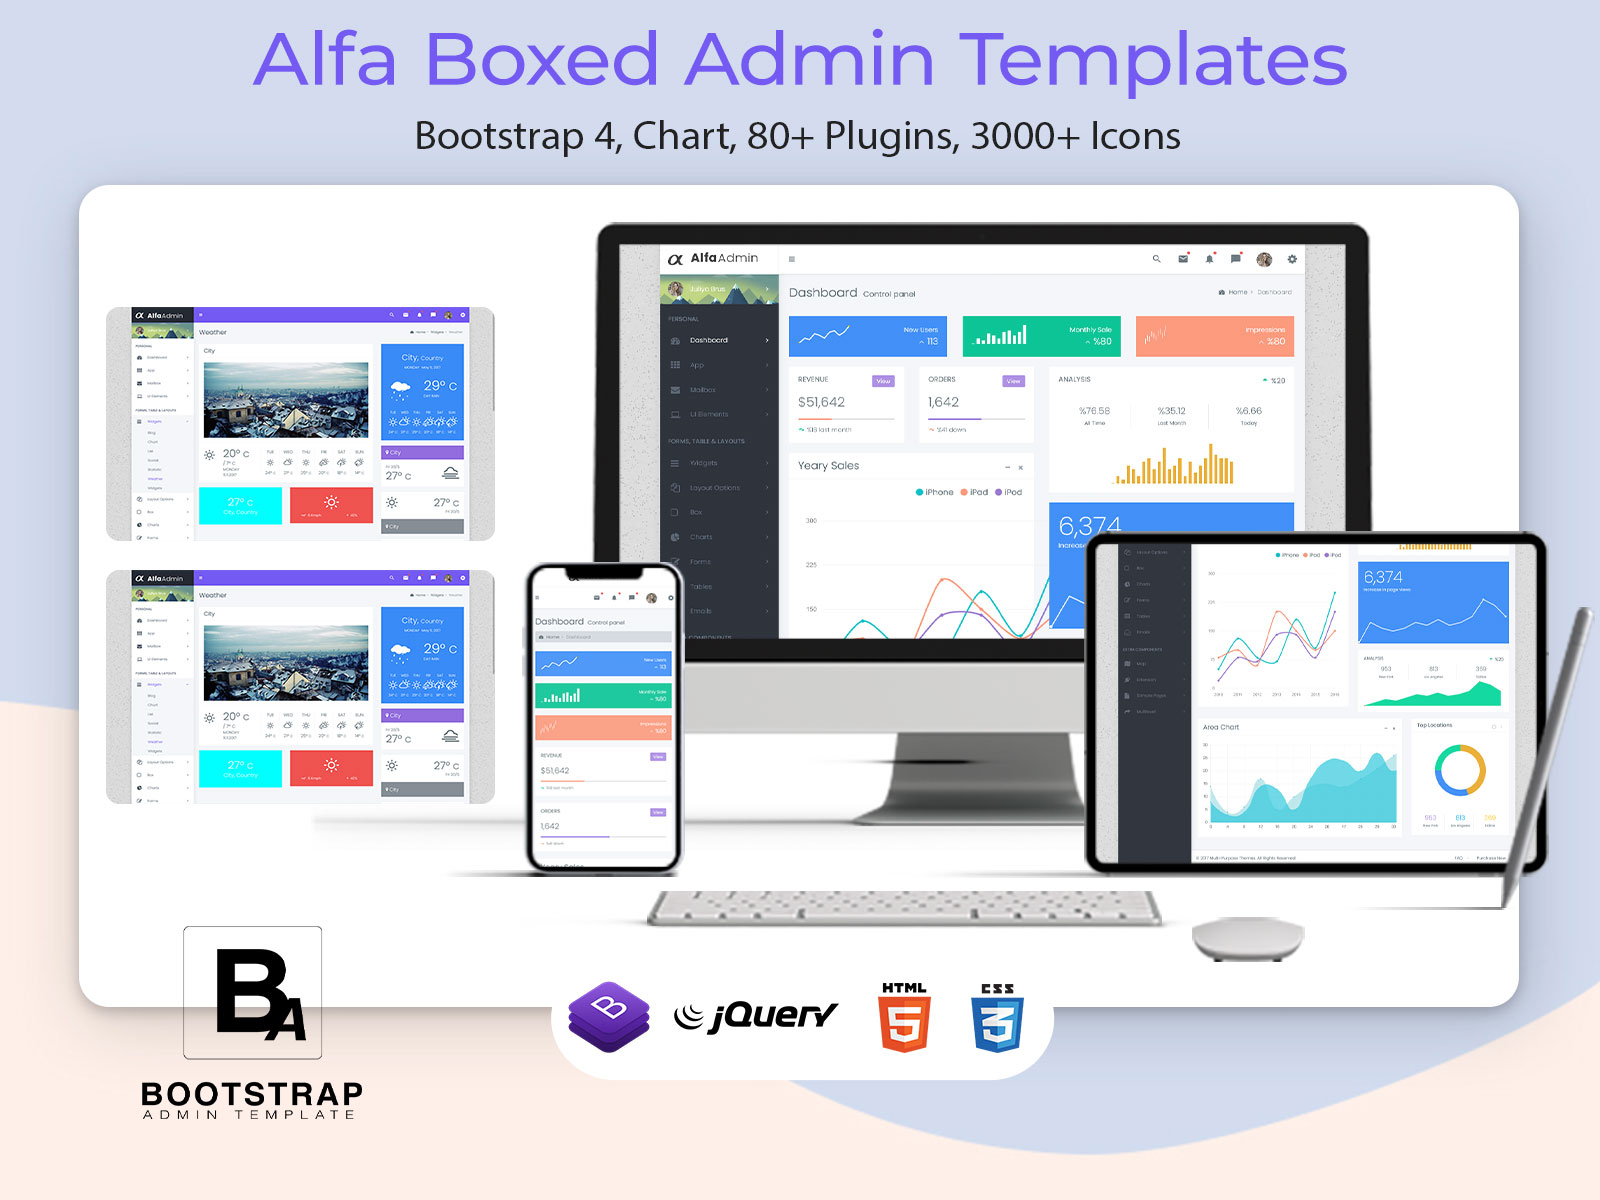 Choose The Alfa Boxed Premium Admin Template For Your Project